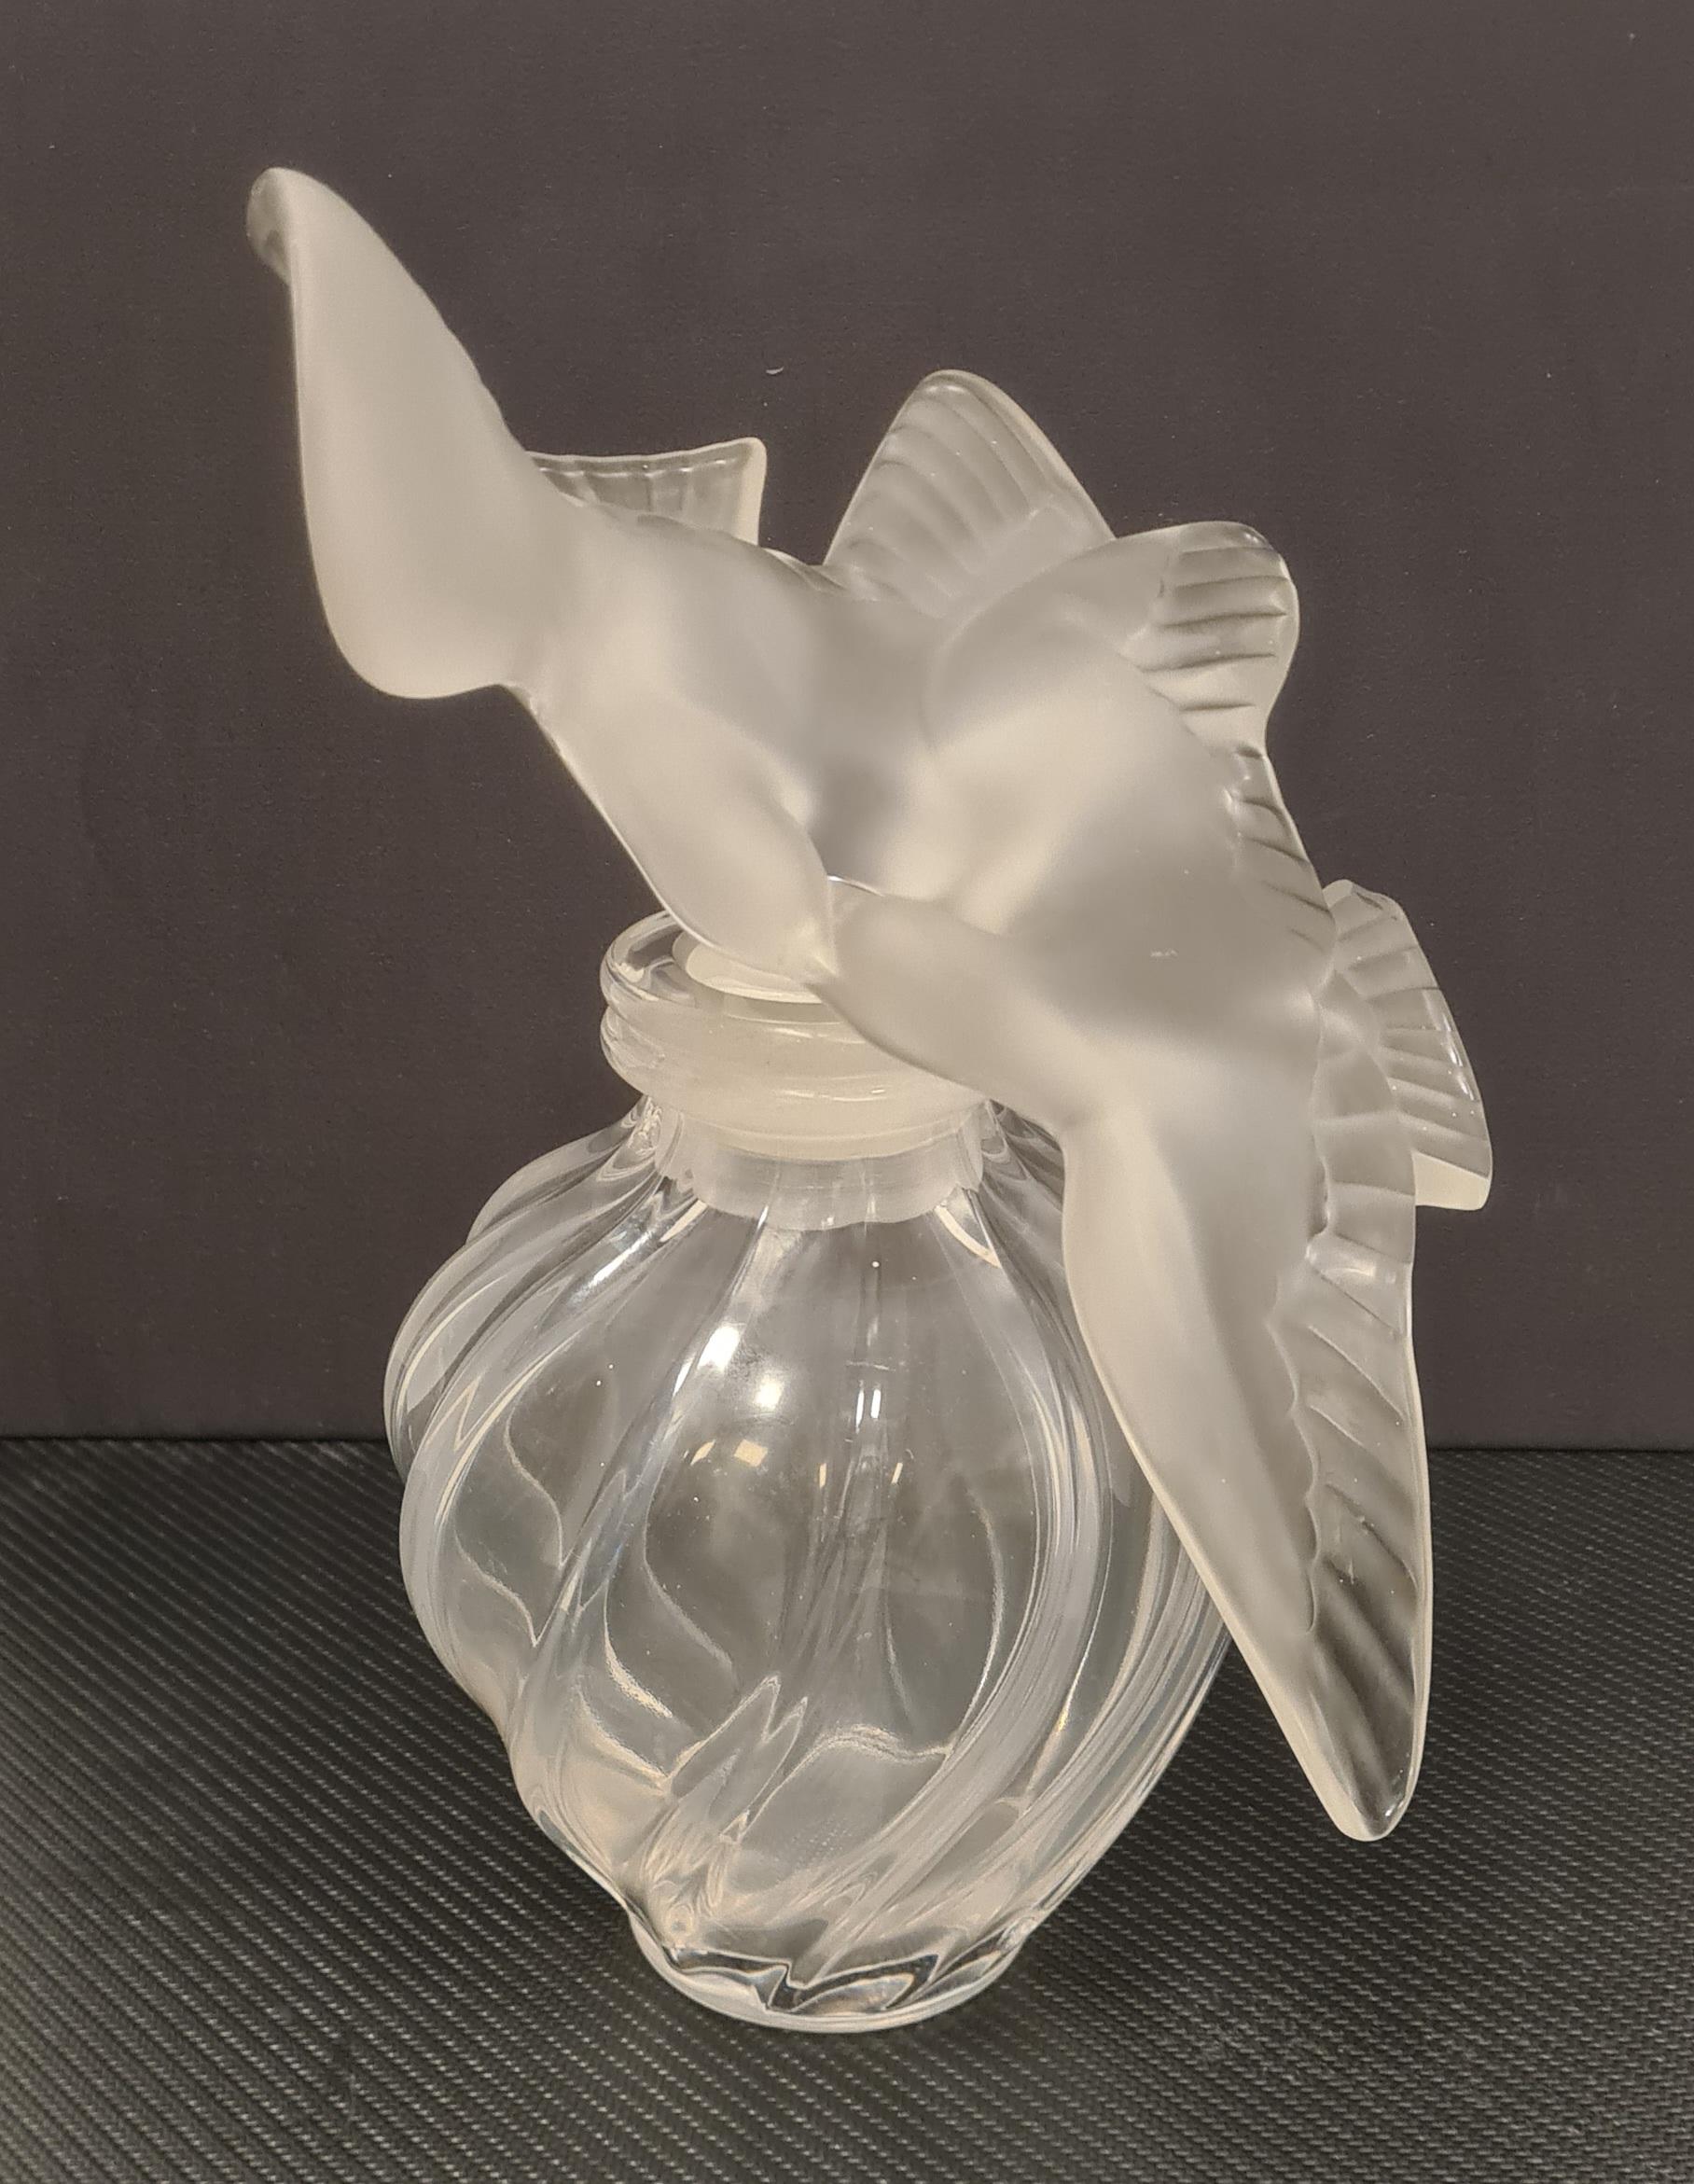 Large collectible bottle made by French glassmaker Lalique.

Bottle that contained the perfume 